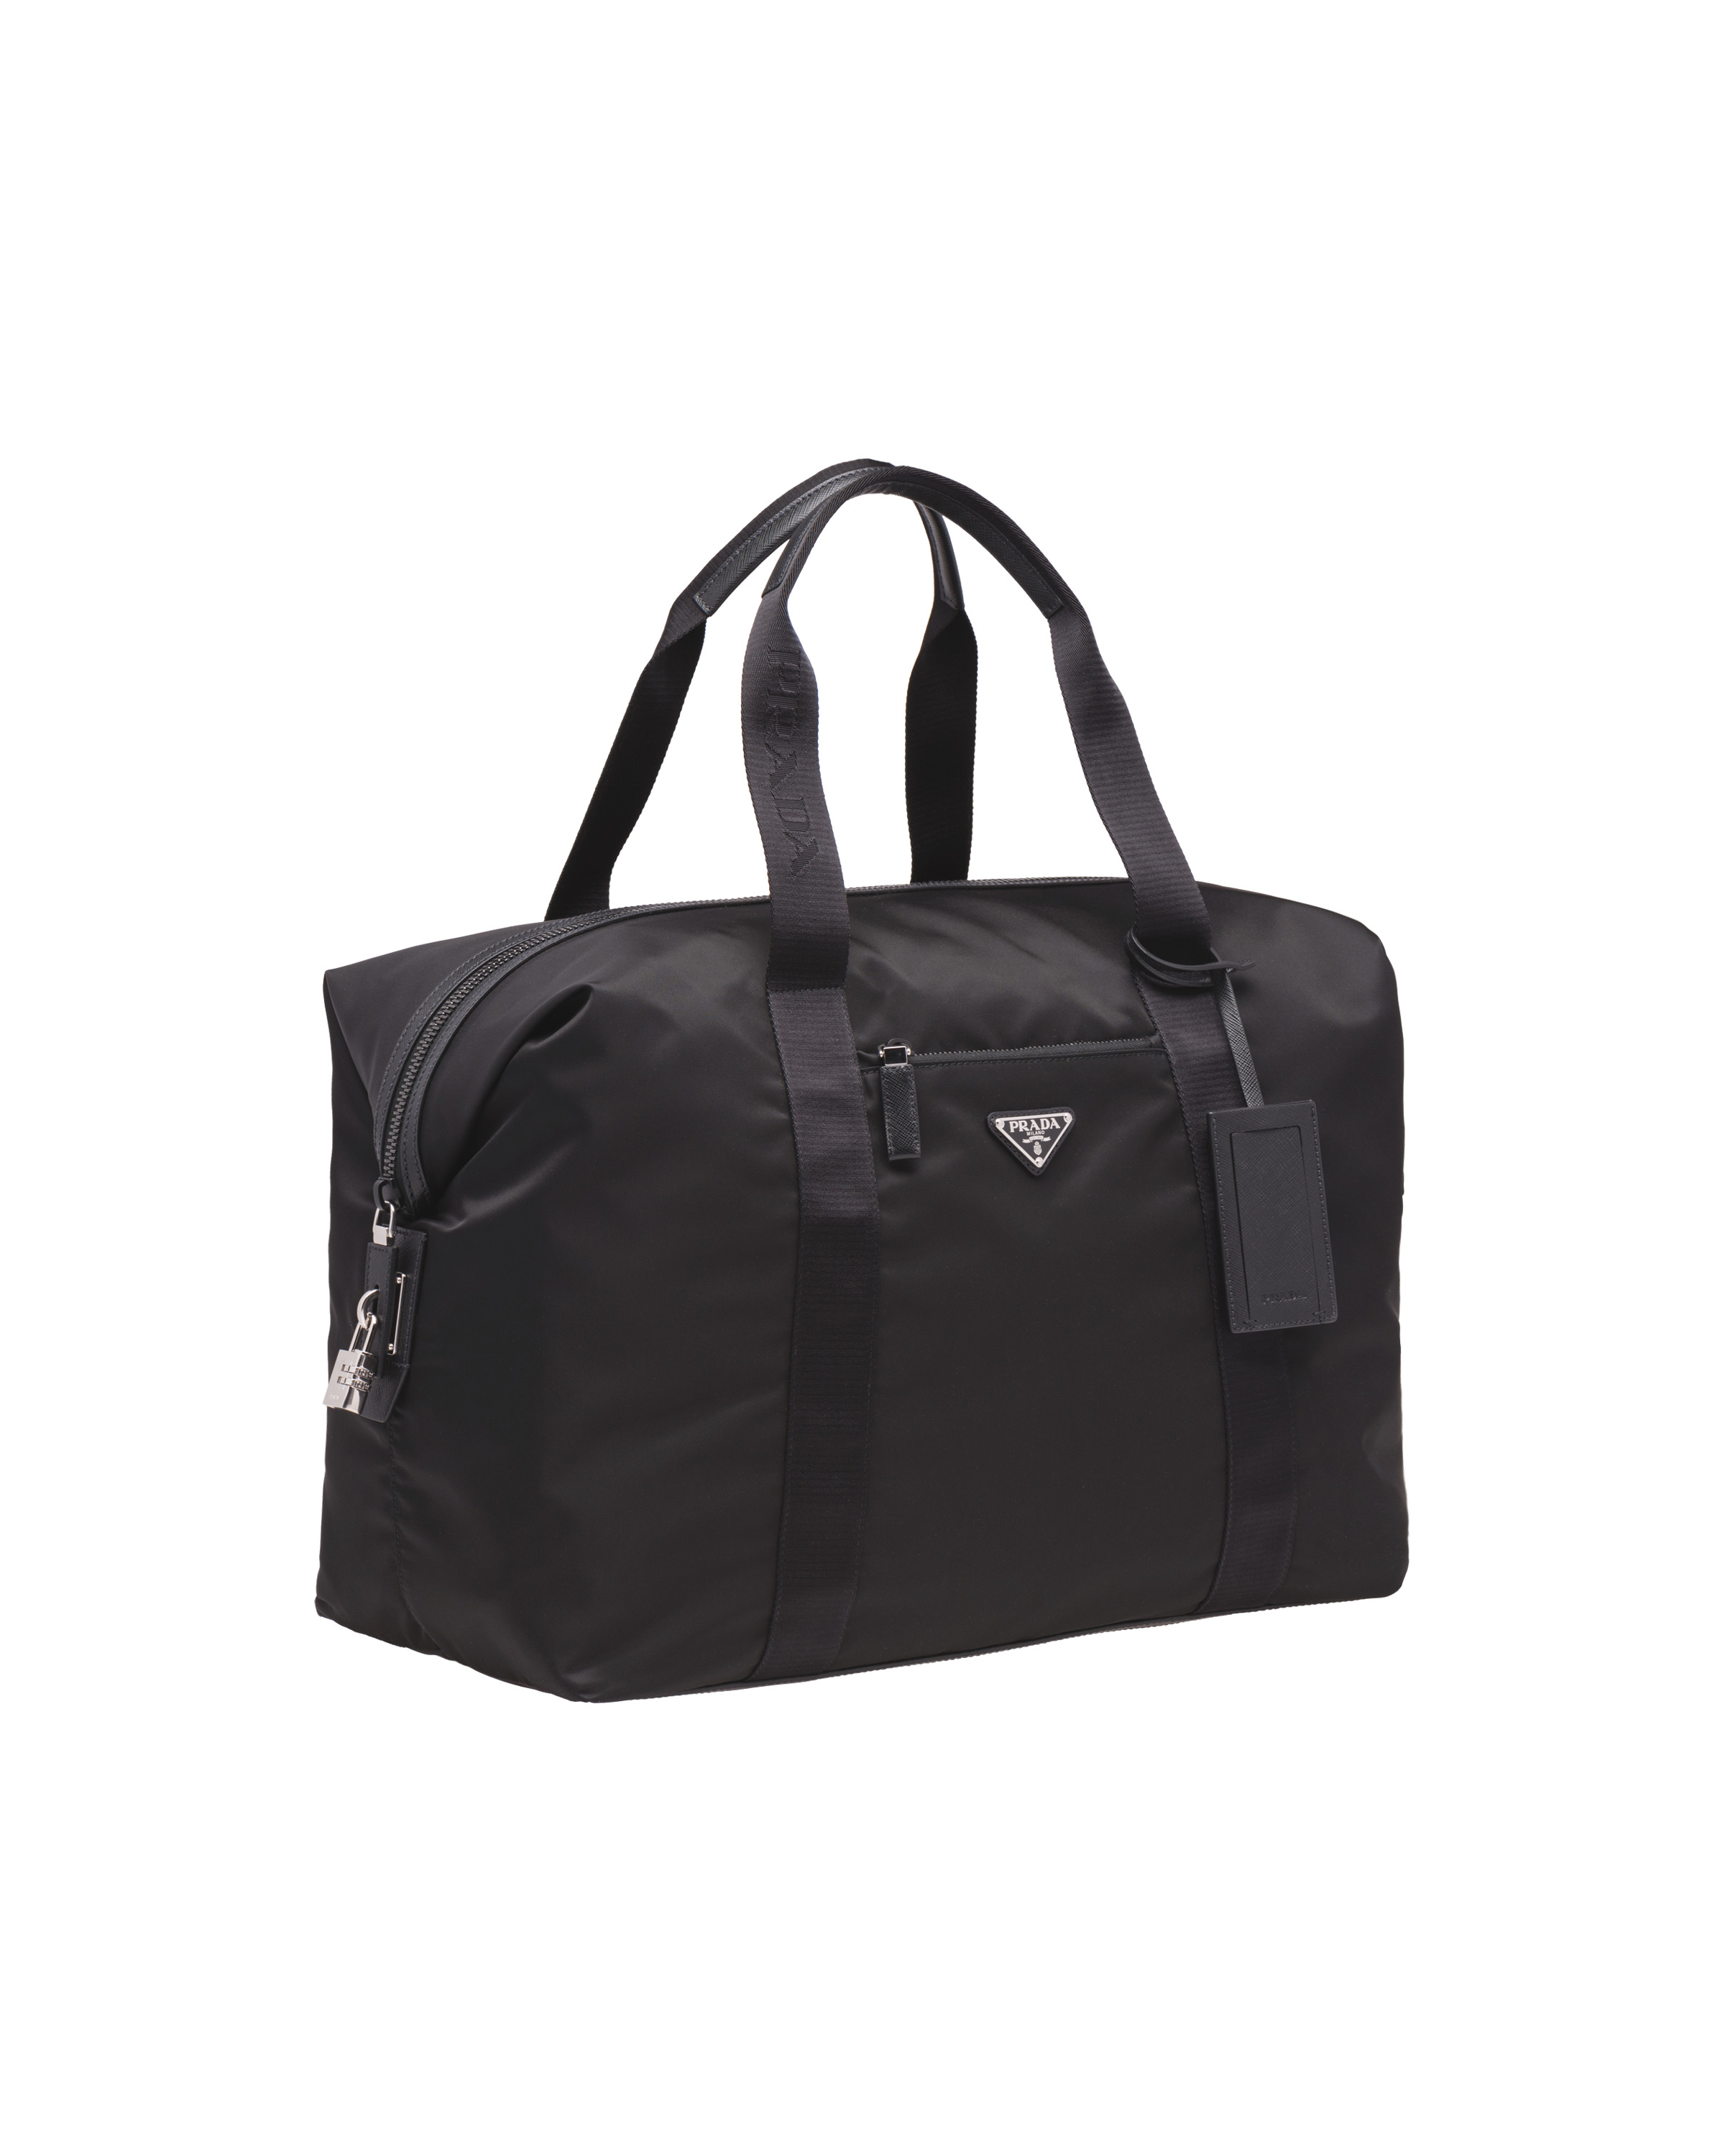 Re-Nylon and Saffiano leather duffle bag - 3